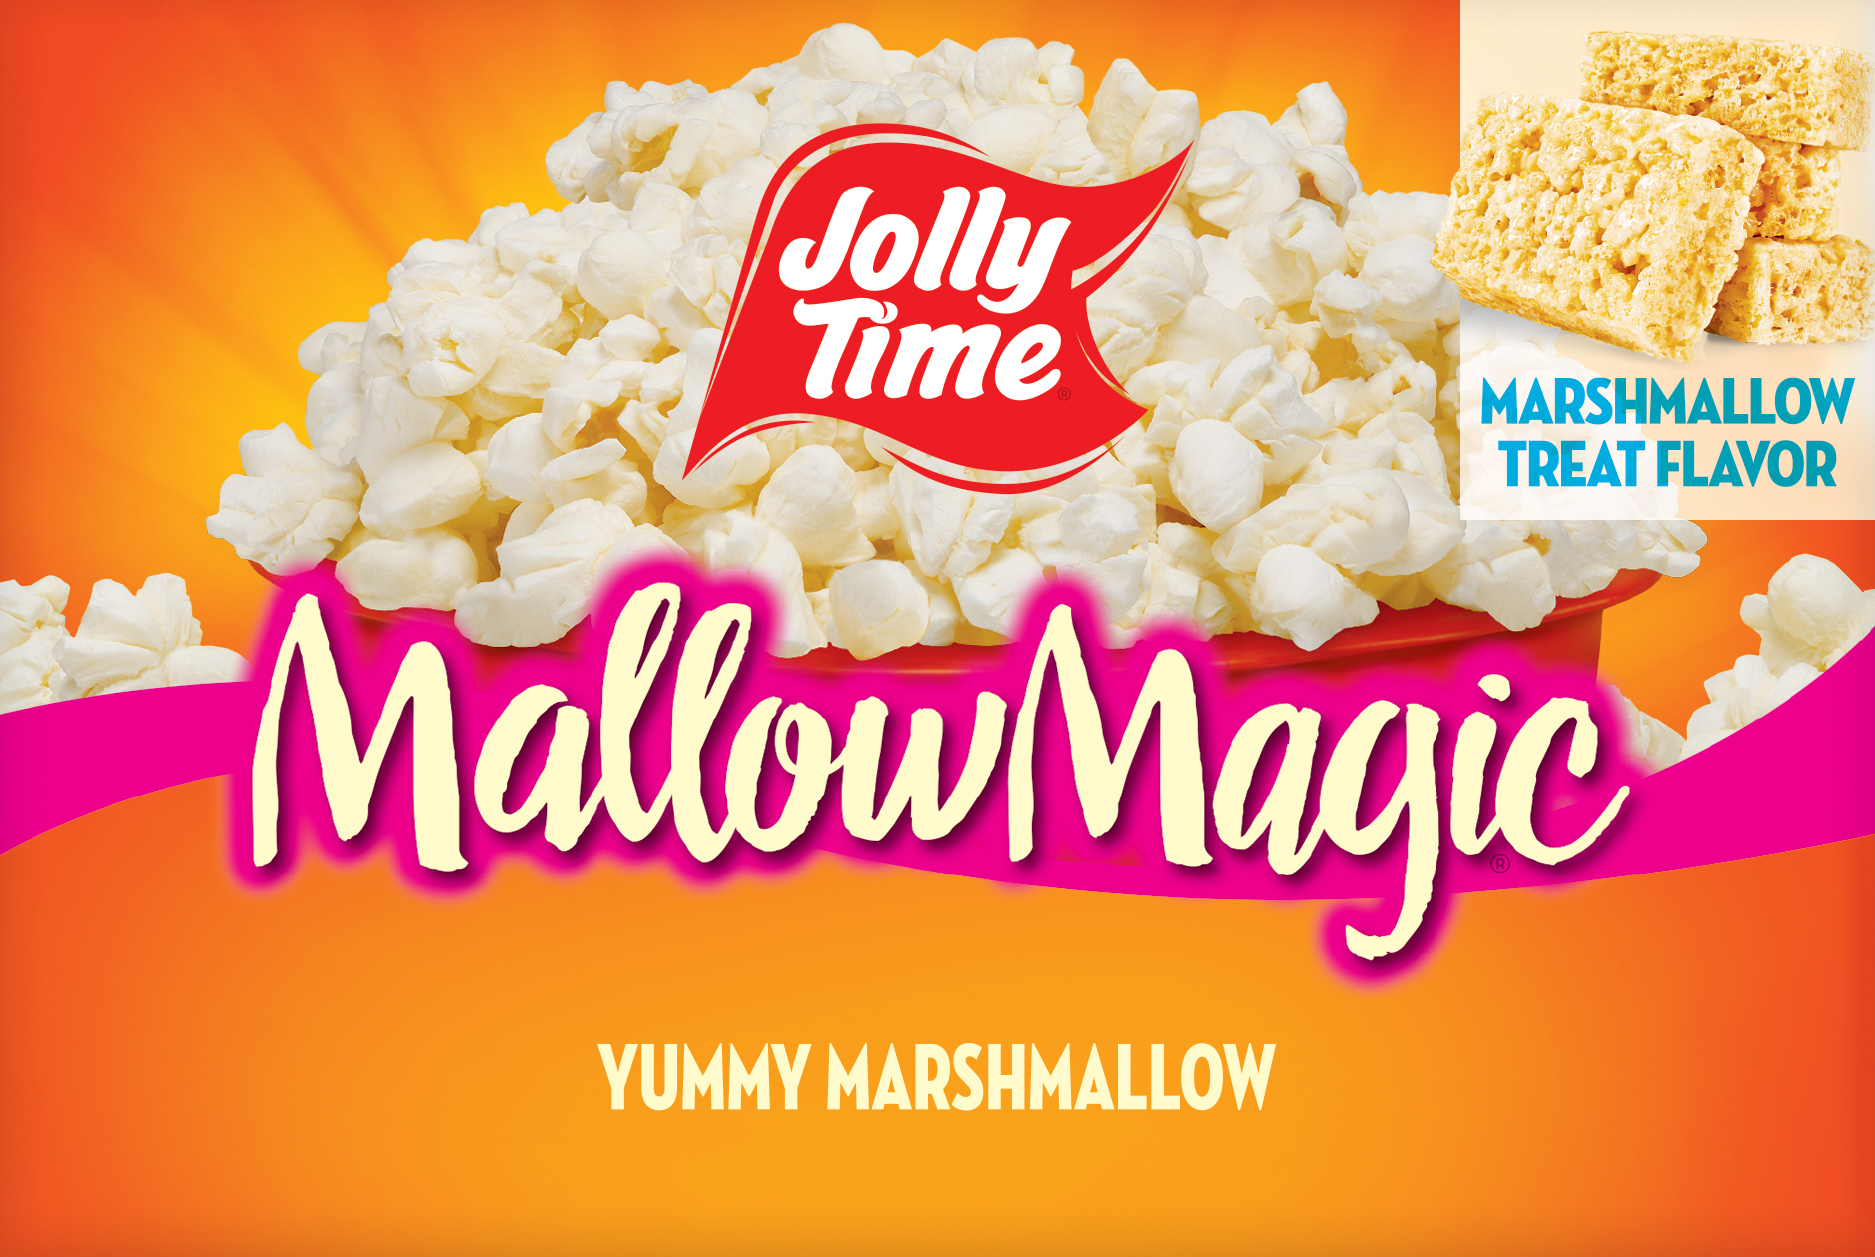 Jolly Time Mallow Magic® Product Image